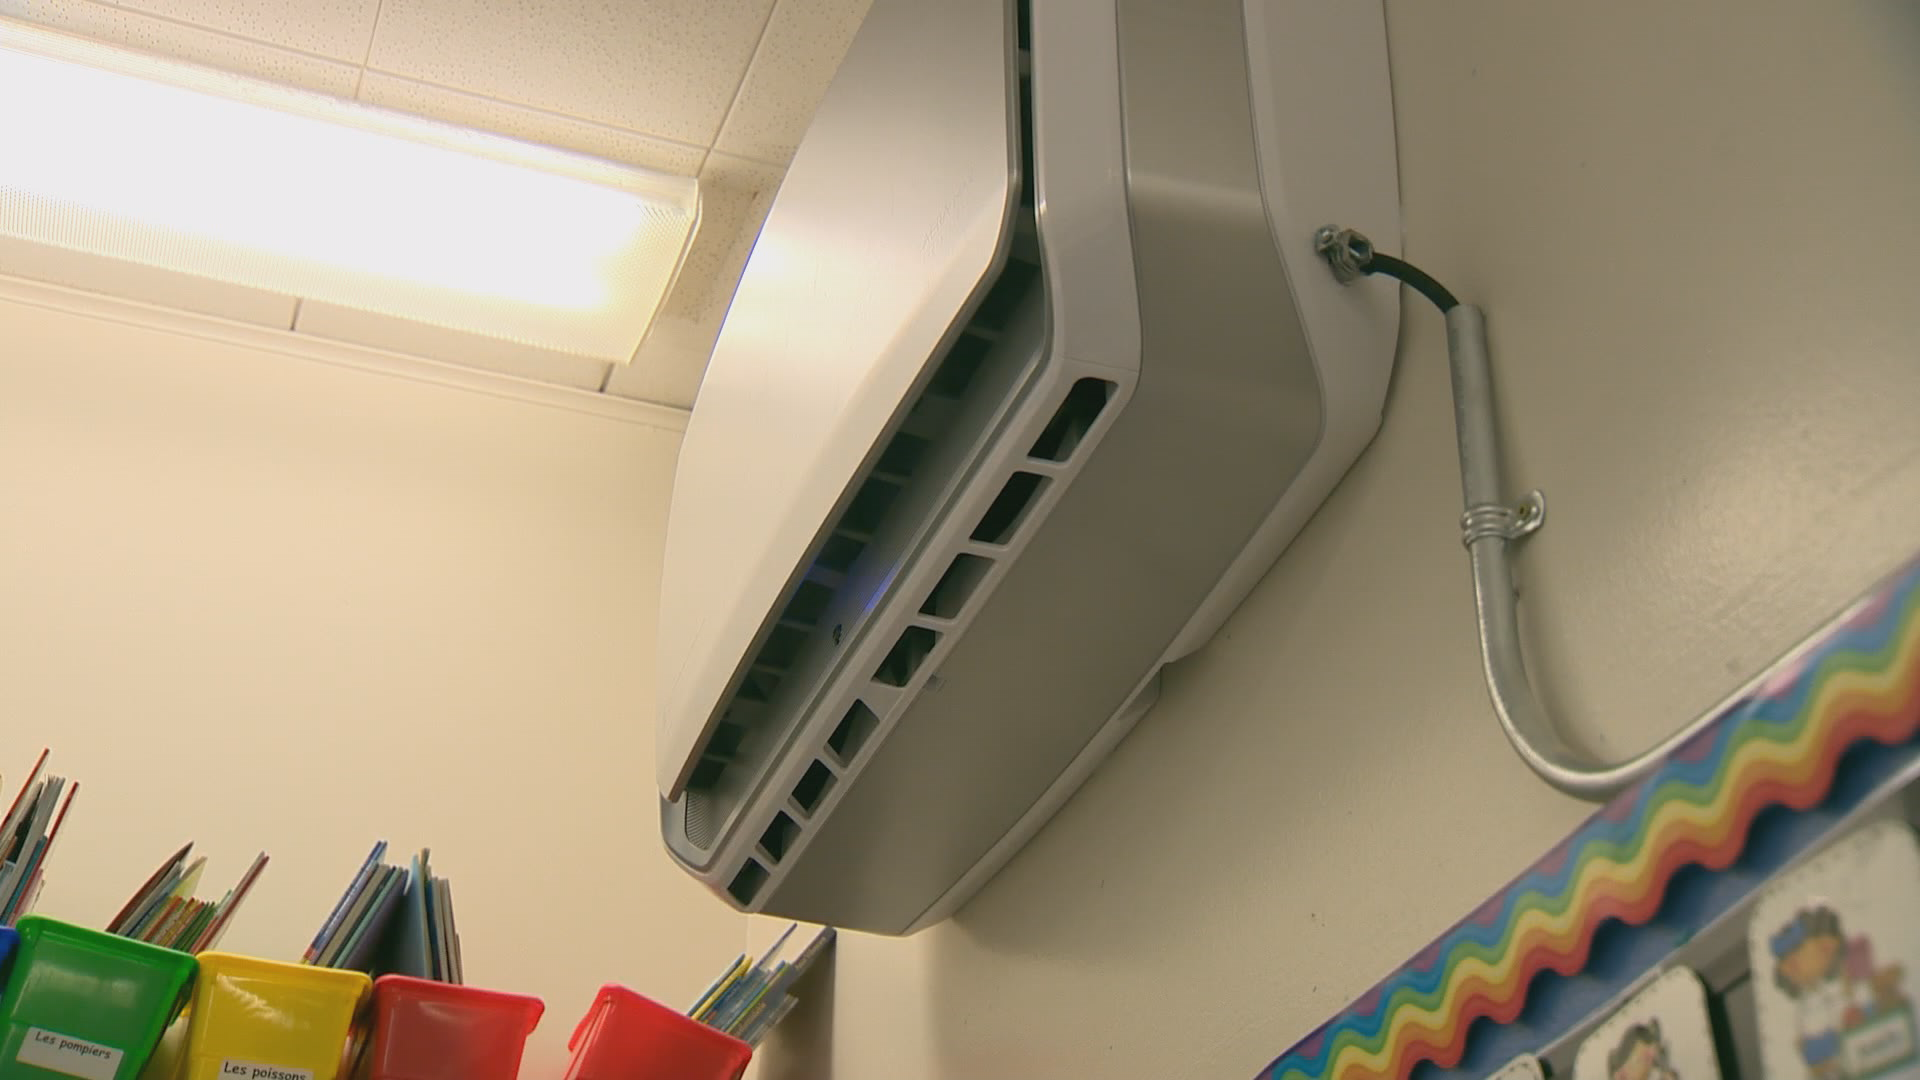 Quebec education ministry denies forbidding air purifiers in French public schools - image